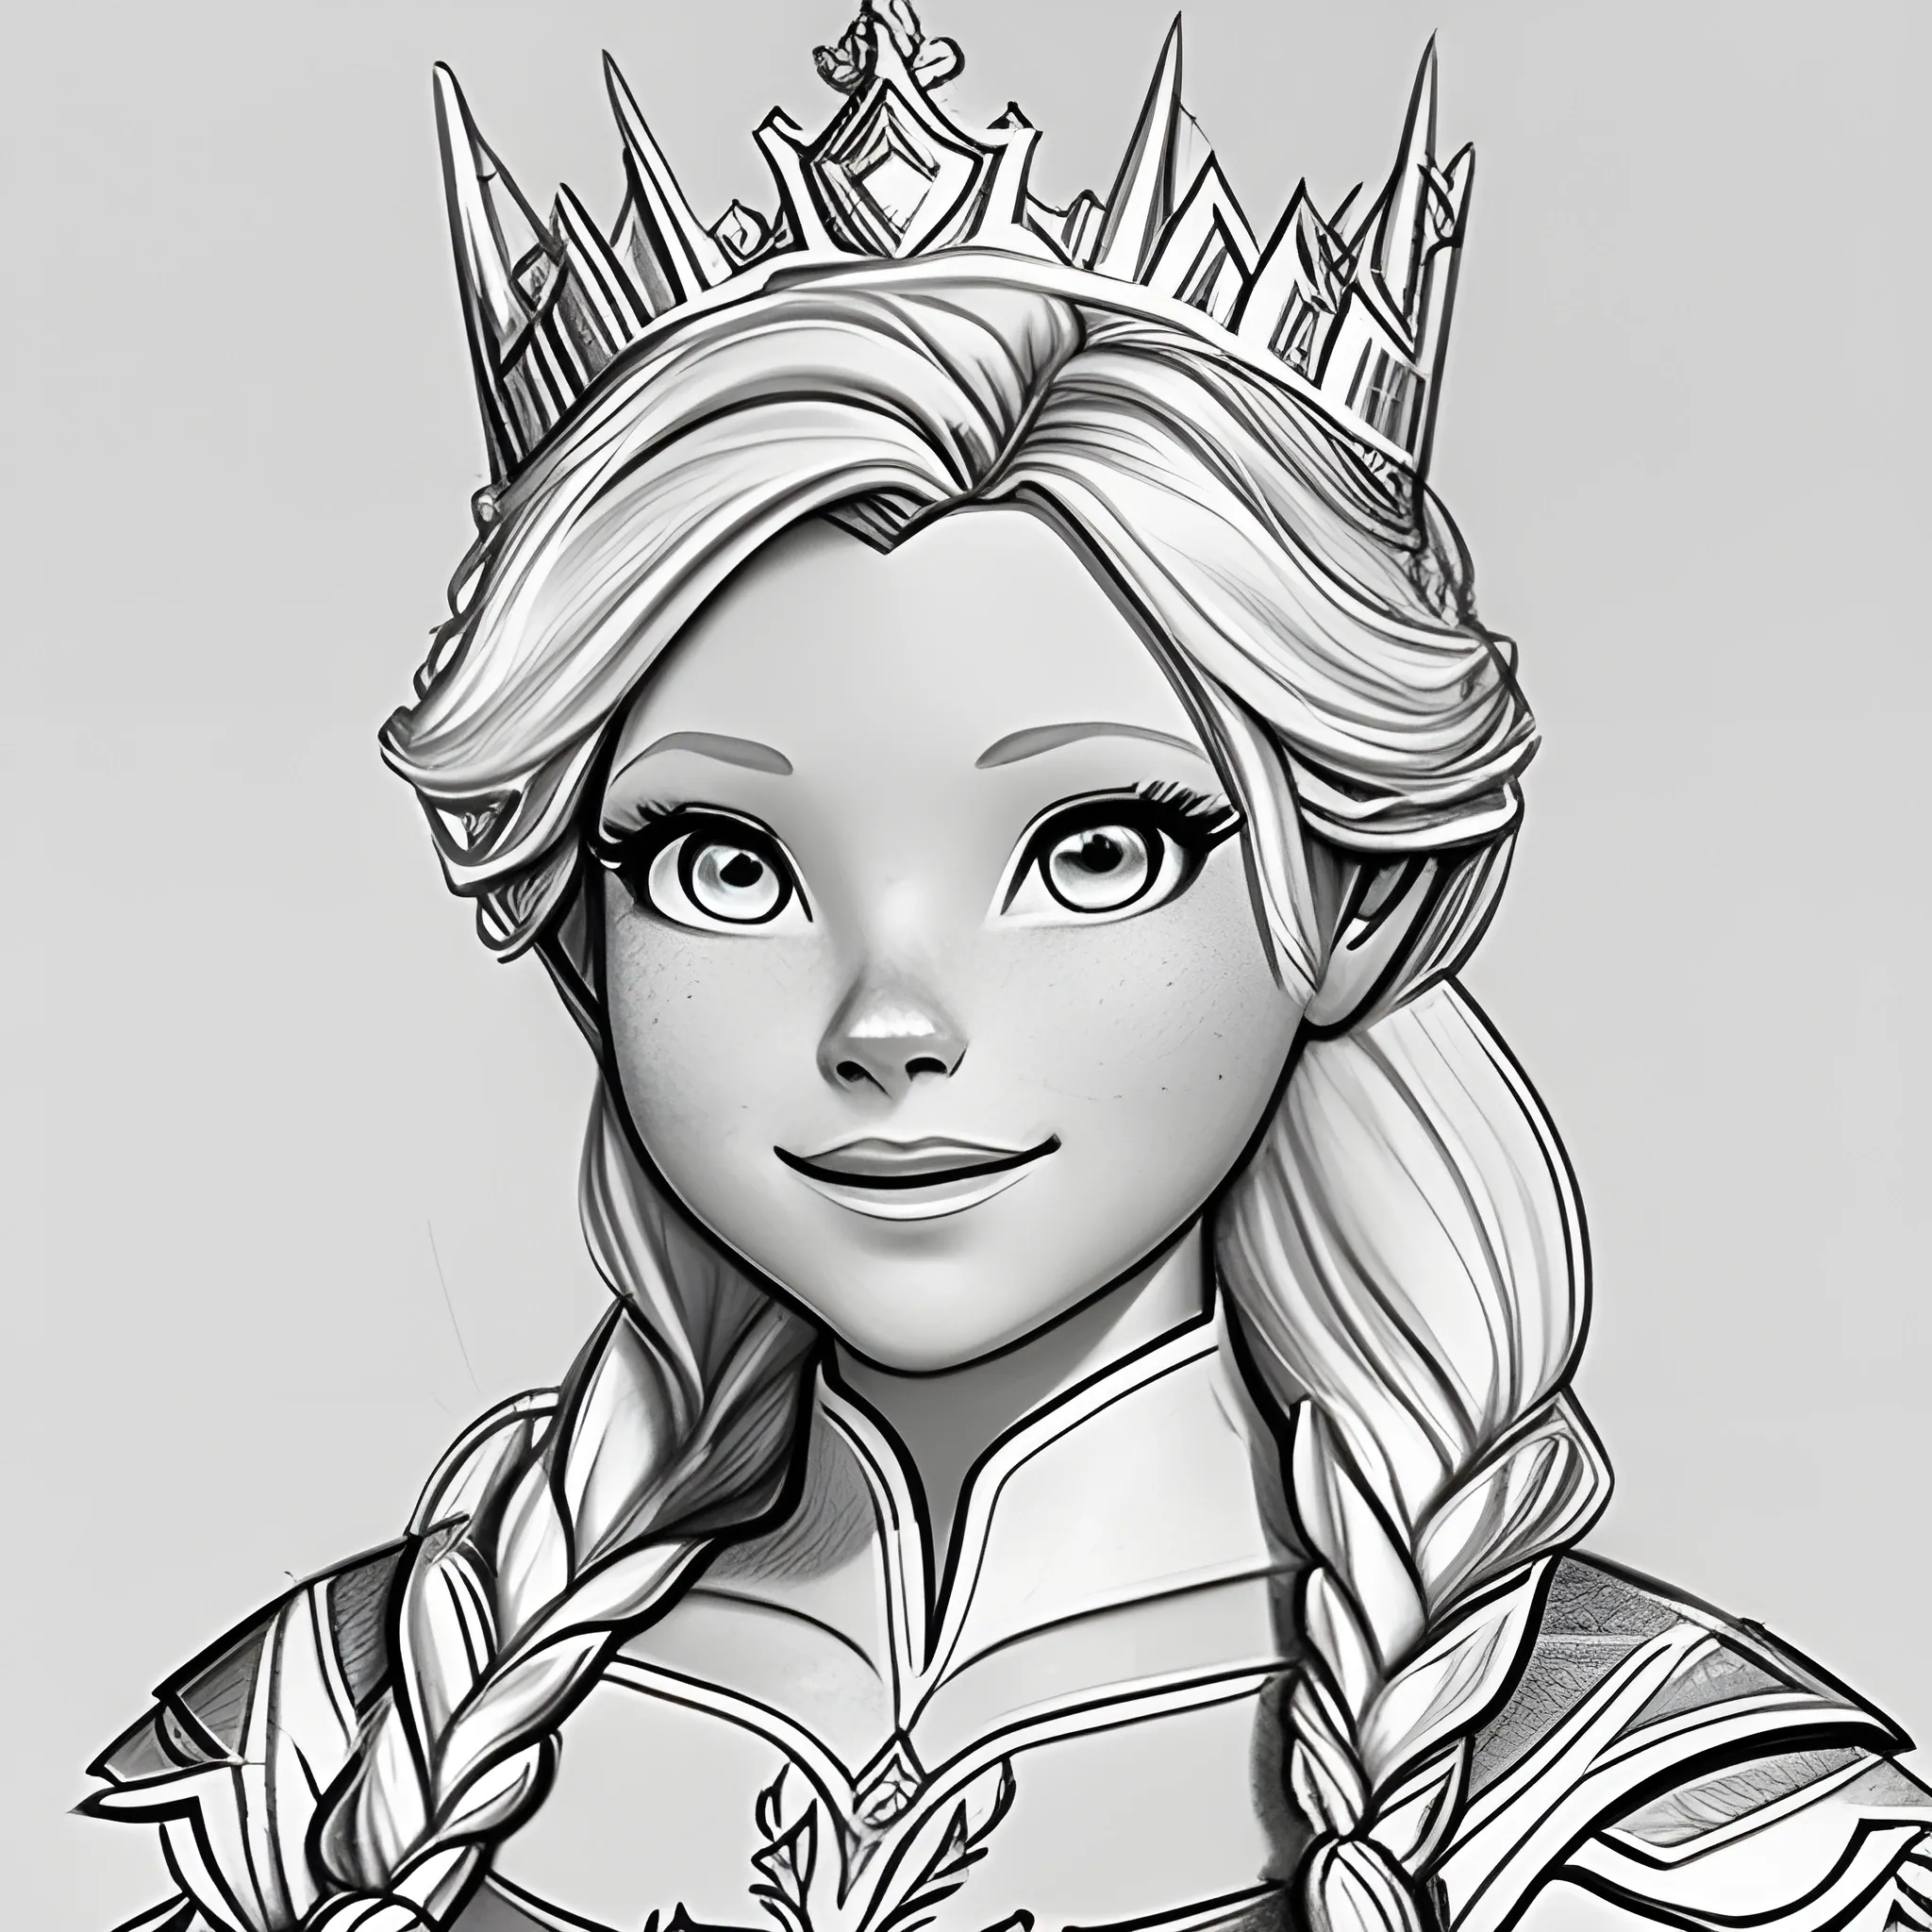 Disney Elsa from Frozen Pencil Drawing Limited Edition PrintRun of 50   1476642123